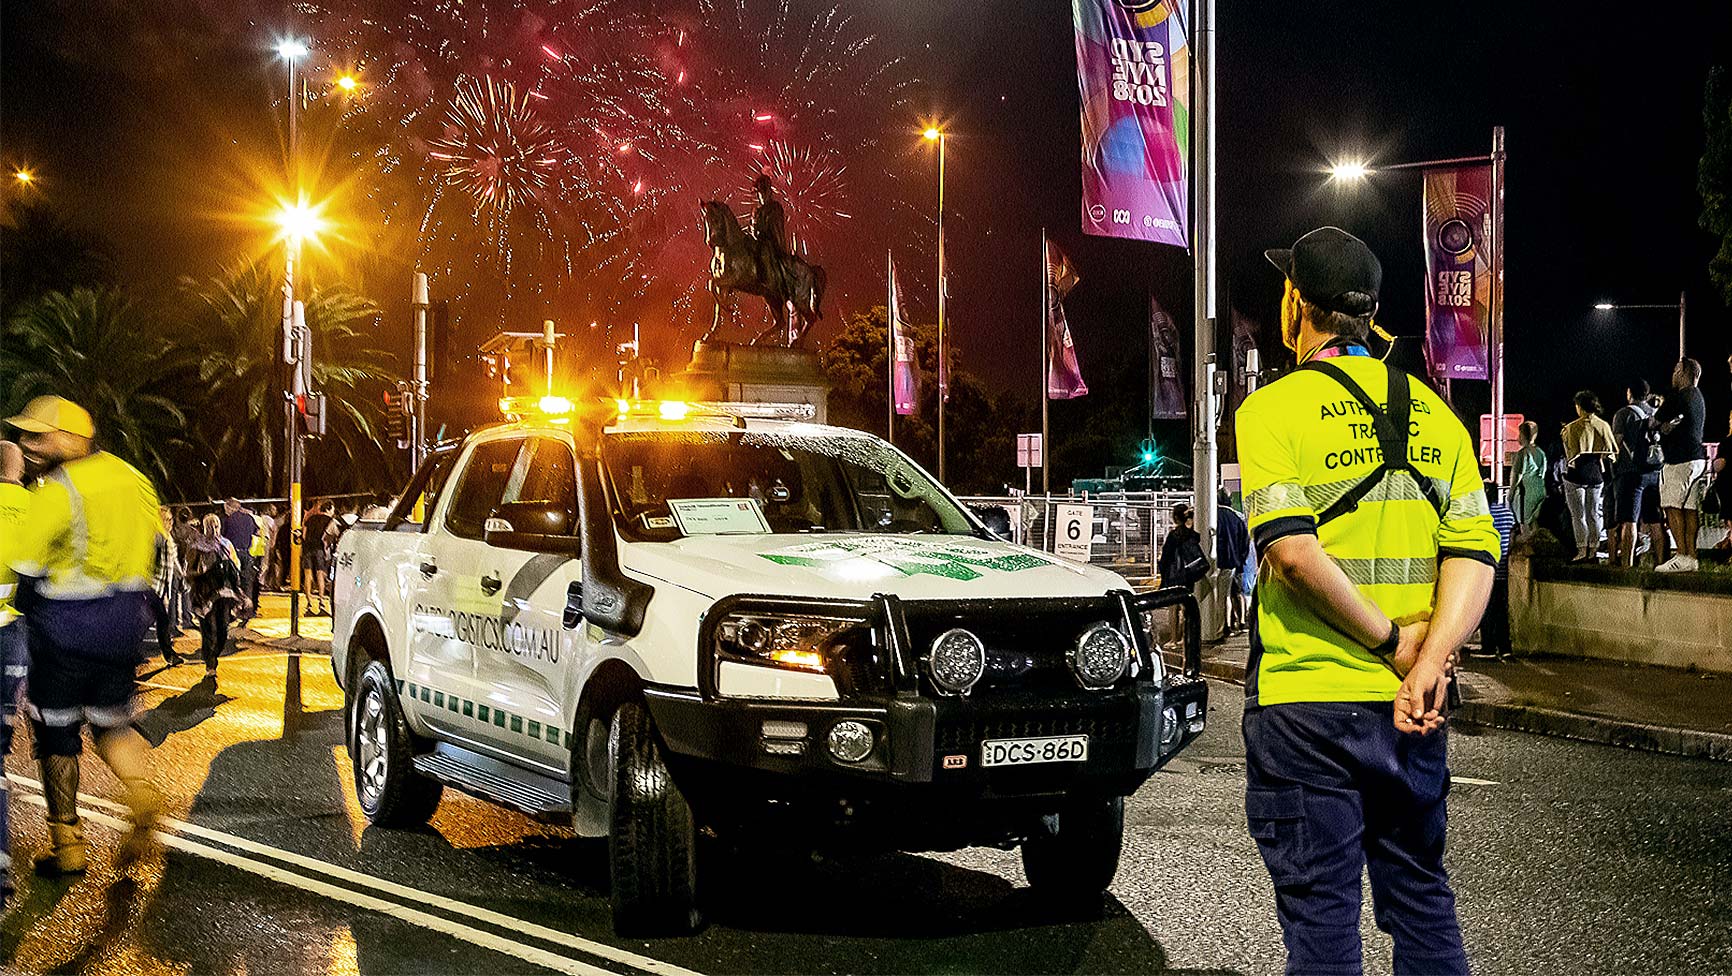 24/7 traffic managementPictured: City of Sydney New Years Eve events traffic management